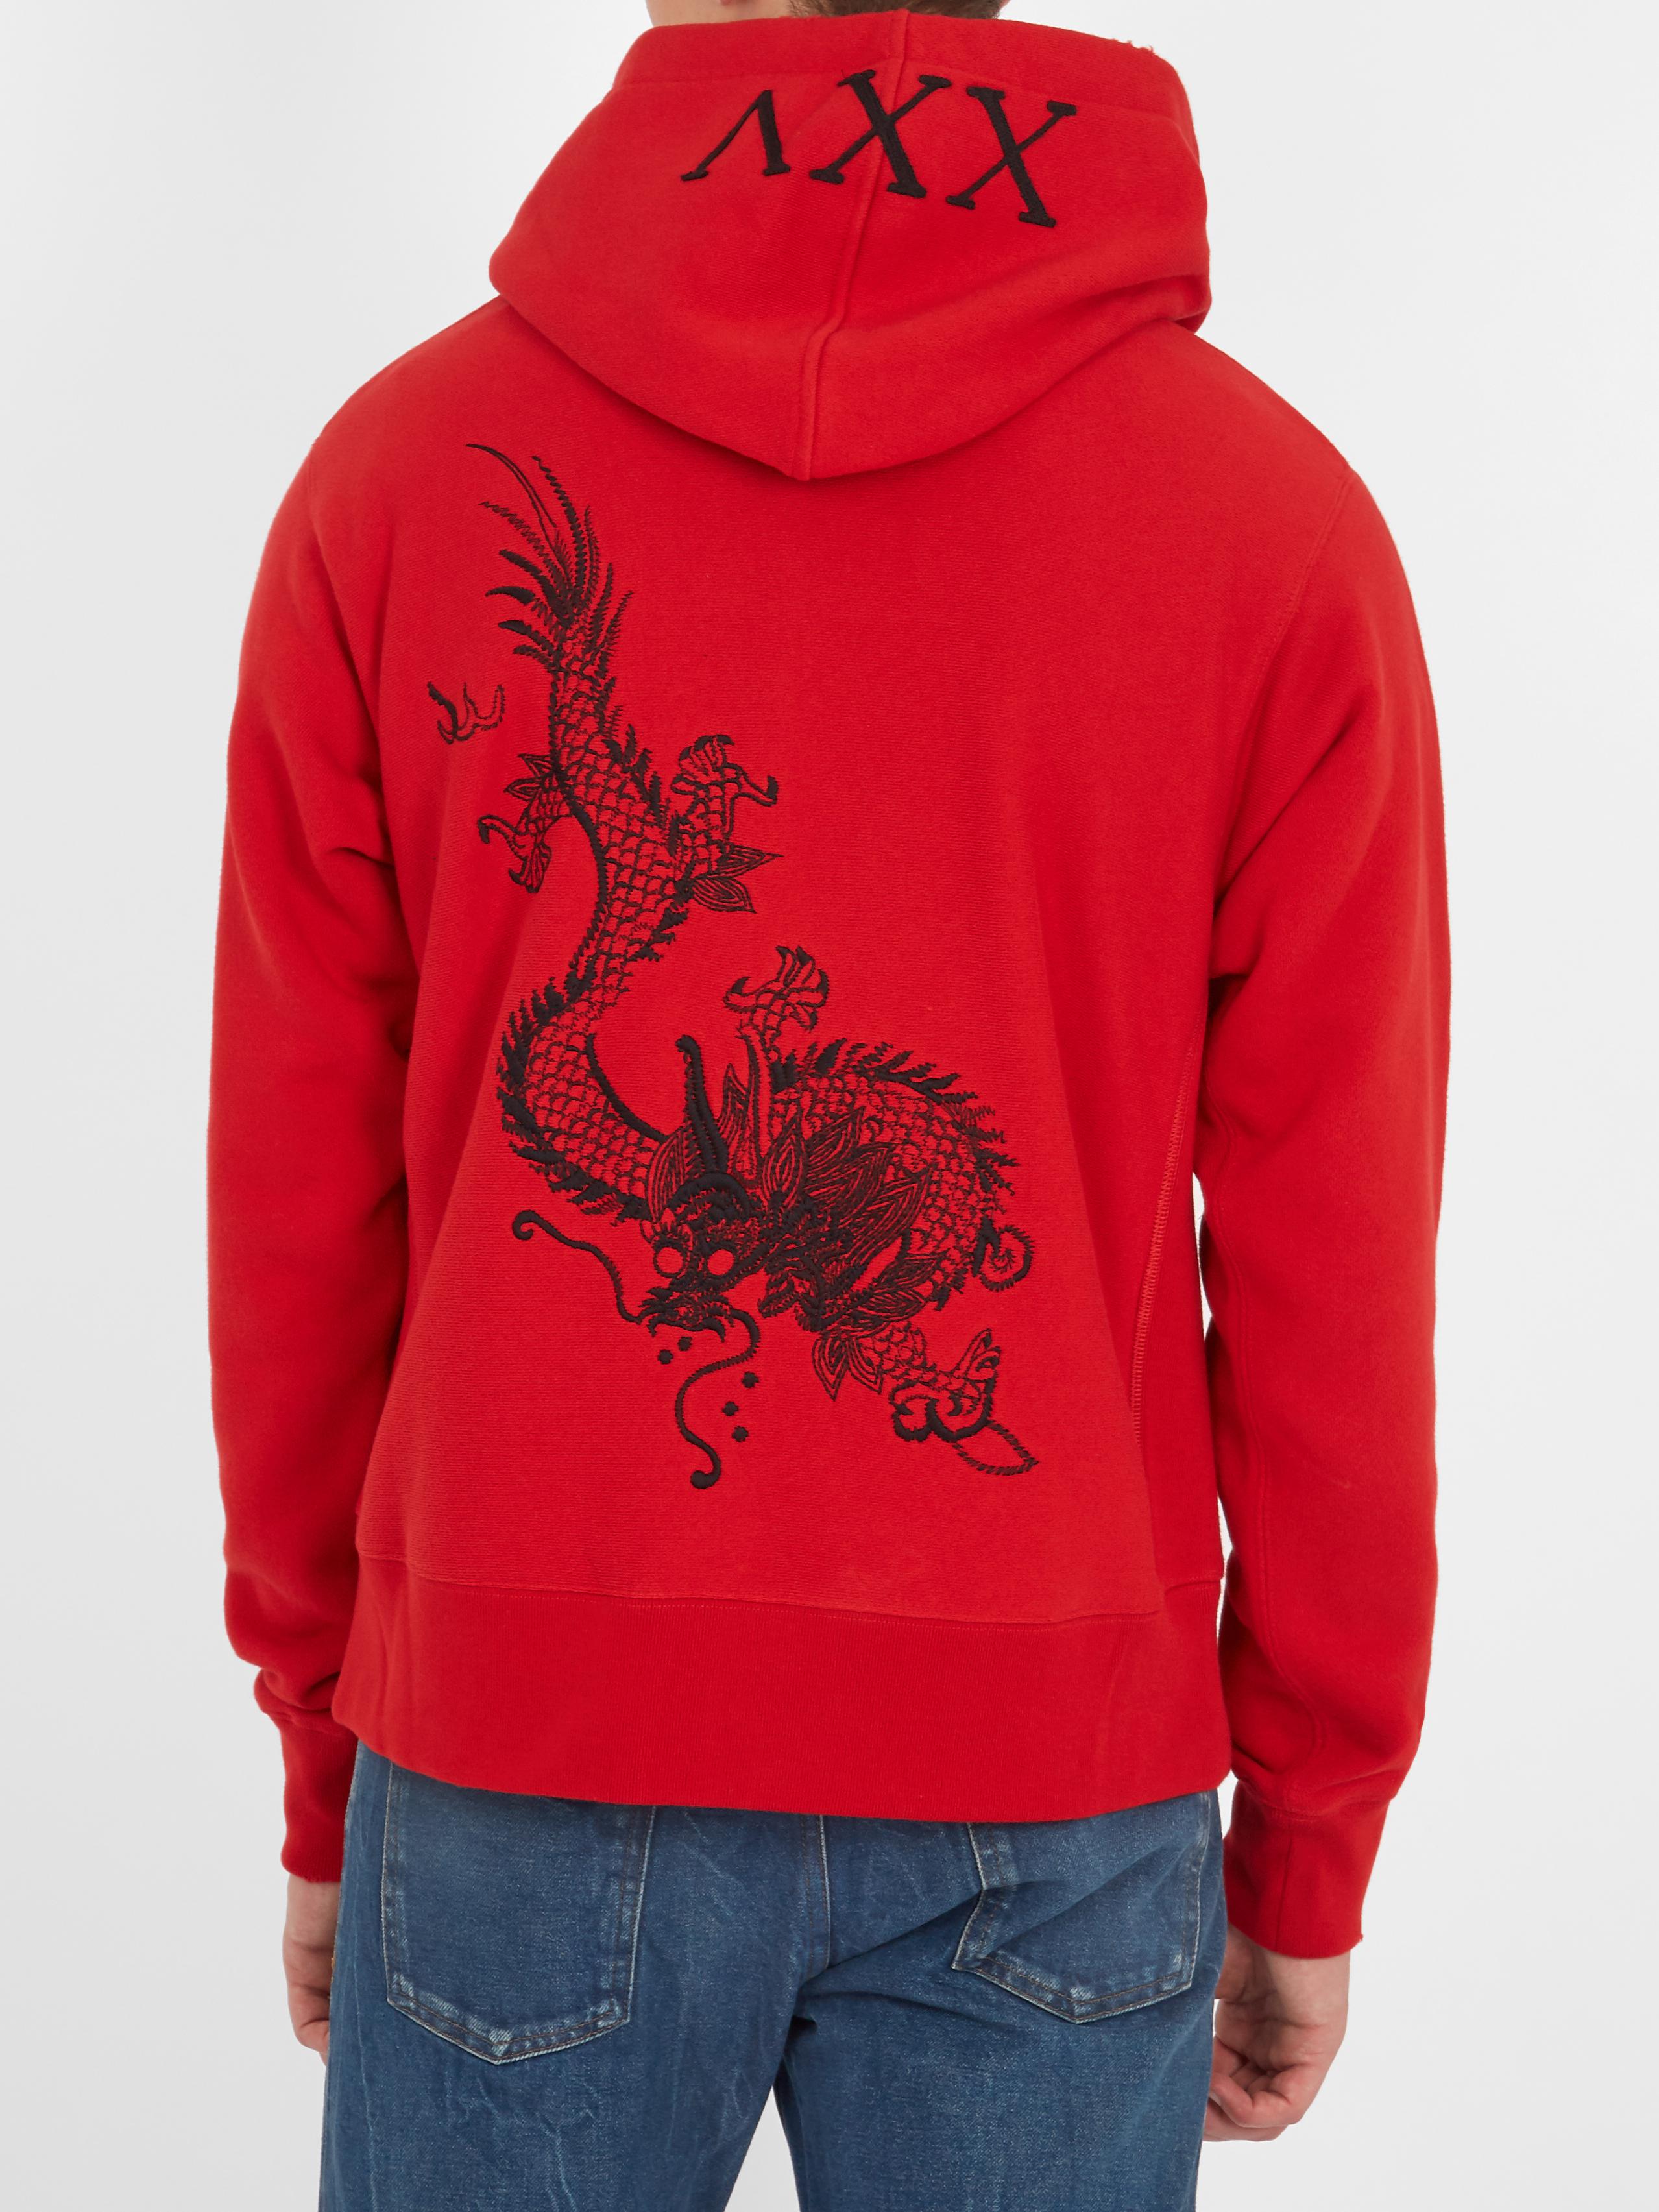 gucci red dragon hoodie,Free delivery,bobsherwood.net